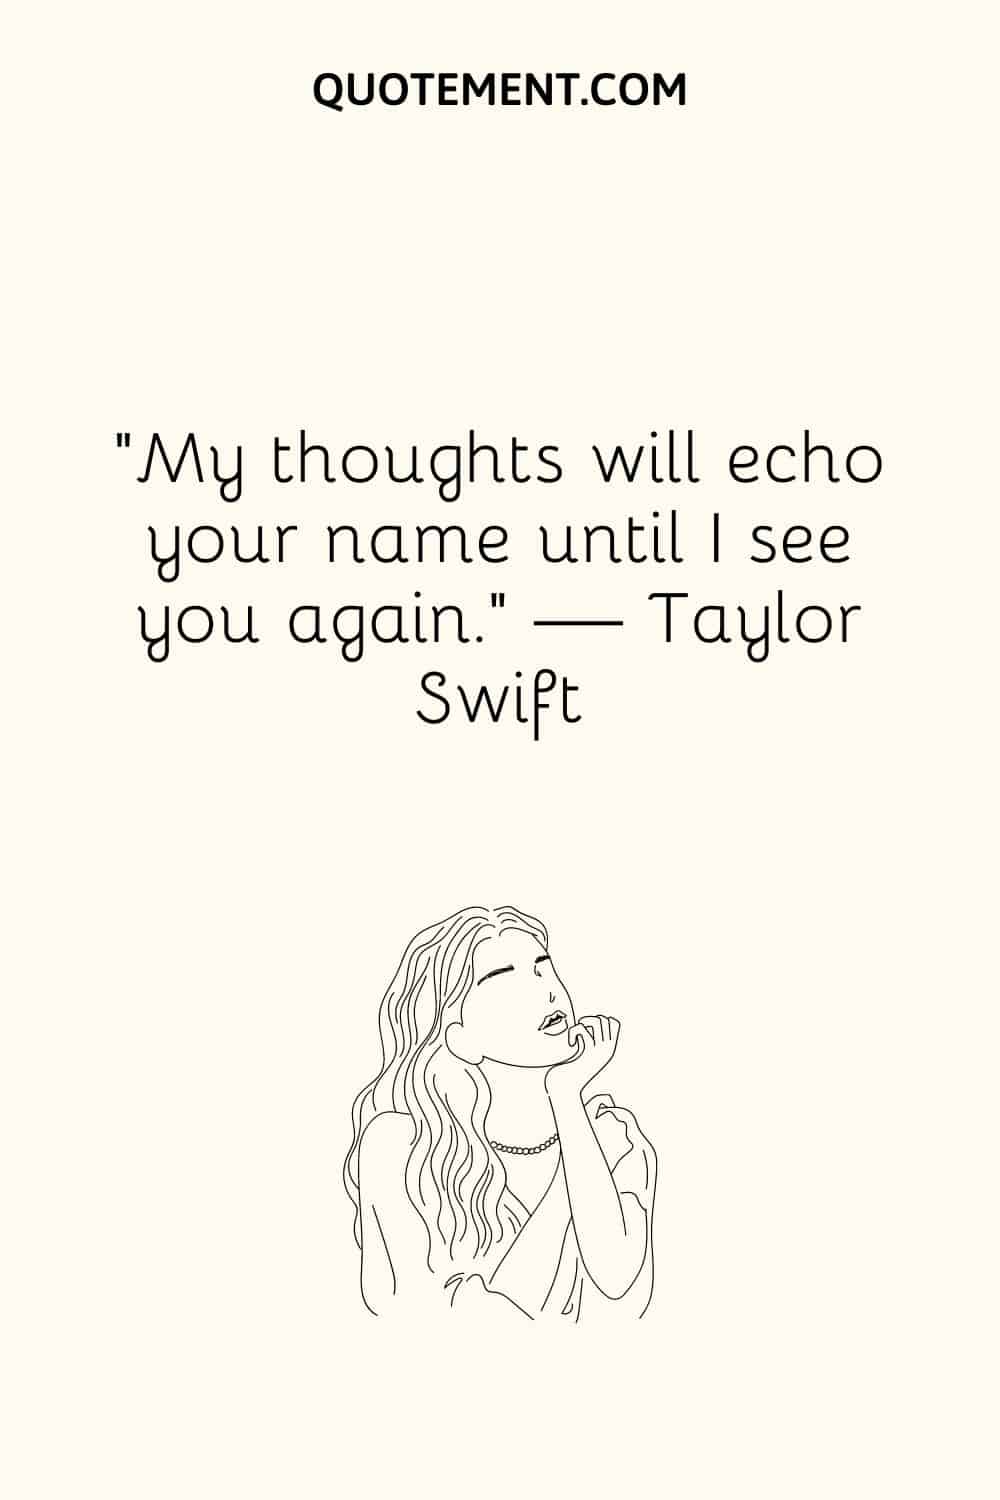 “My thoughts will echo your name until I see you again.” — Taylor Swift